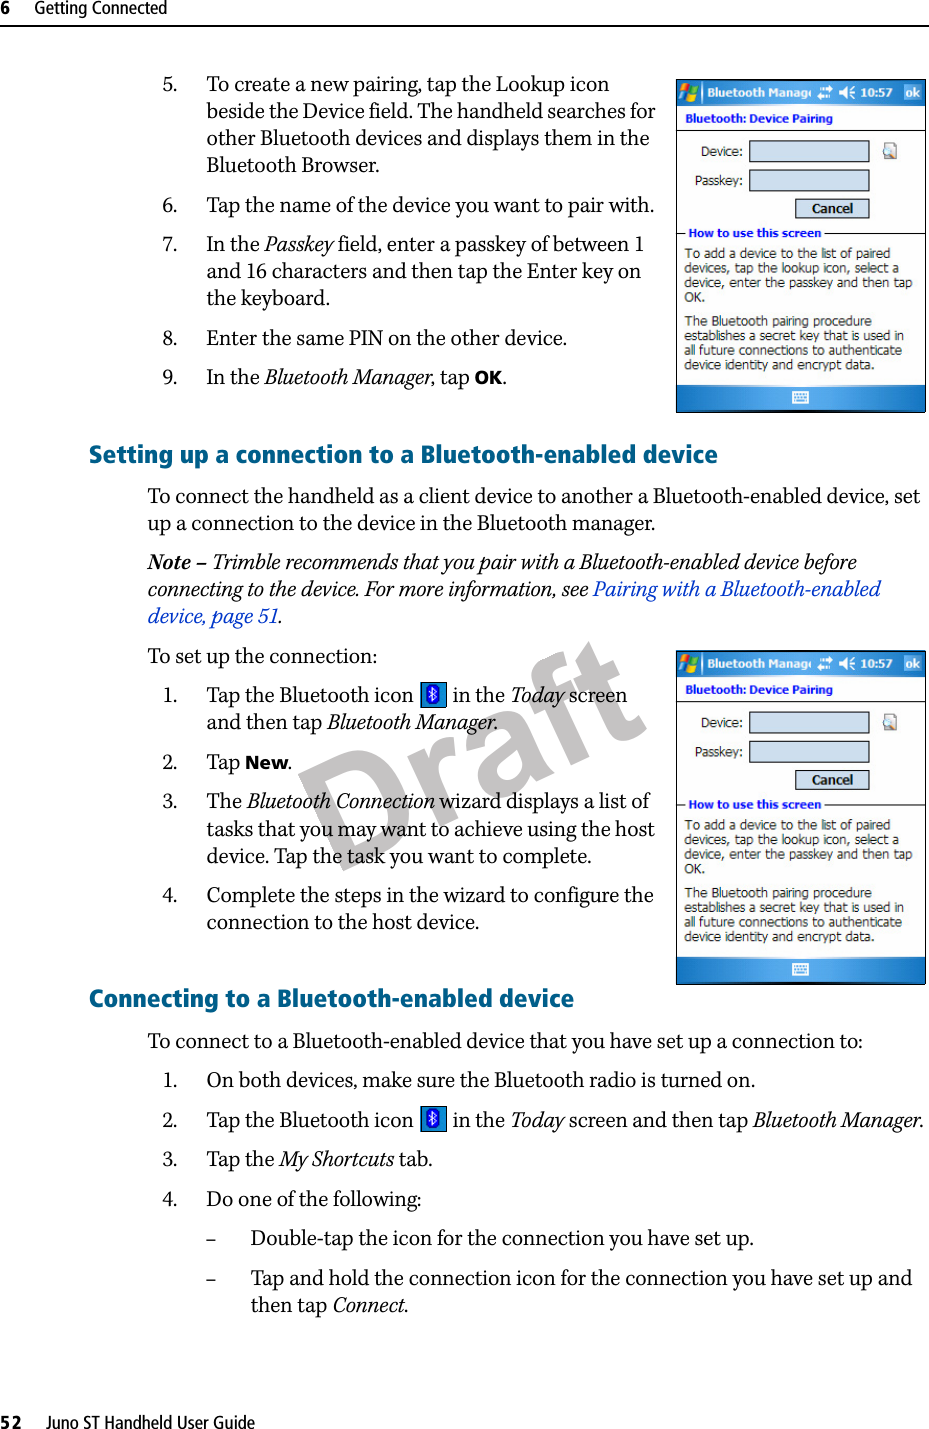 Draft6     Getting Connected52     Juno ST Handheld User Guide5. To create a new pairing, tap the Lookup icon beside the Device field. The handheld searches for other Bluetooth devices and displays them in the Bluetooth Browser.6. Tap the name of the device you want to pair with.7. In the Passkey field, enter a passkey of between 1 and 16 characters and then tap the Enter key on the keyboard.8. Enter the same PIN on the other device.9. In the Bluetooth Manager, tap OK.Setting up a connection to a Bluetooth-enabled device To connect the handheld as a client device to another a Bluetooth-enabled device, set up a connection to the device in the Bluetooth manager.Note – Trimble recommends that you pair with a Bluetooth-enabled device before connecting to the device. For more information, see Pairing with a Bluetooth-enabled device, page 51.To set up the connection:1. Tap the Bluetooth icon   in the Today screen and then tap Bluetooth Manager.2. Tap New.3. The Bluetooth Connection wizard displays a list of tasks that you may want to achieve using the host device. Tap the task you want to complete.4. Complete the steps in the wizard to configure the connection to the host device.Connecting to a Bluetooth-enabled deviceTo connect to a Bluetooth-enabled device that you have set up a connection to:1. On both devices, make sure the Bluetooth radio is turned on.2. Tap the Bluetooth icon   in the Today screen and then tap Bluetooth Manager.3. Tap the My Shortcuts tab.4. Do one of the following:–Double-tap the icon for the connection you have set up.–Tap and hold the connection icon for the connection you have set up and then tap Connect.